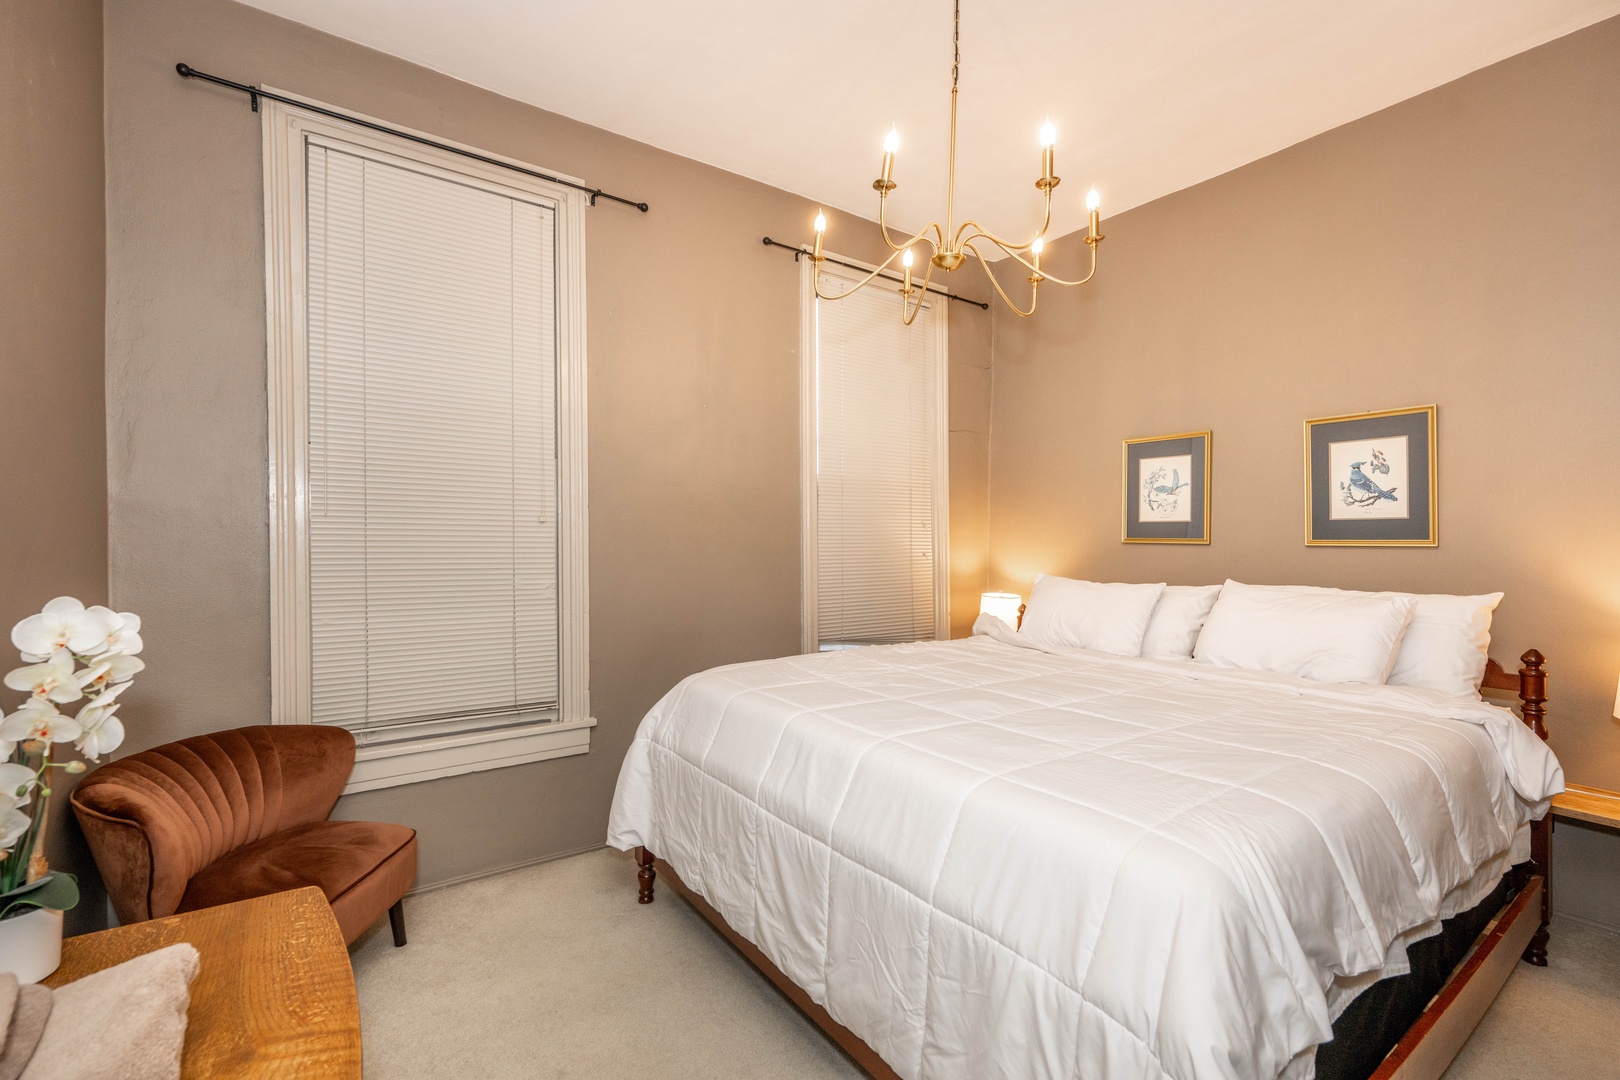 The elegant private bedroom offers a regal king-sized bed